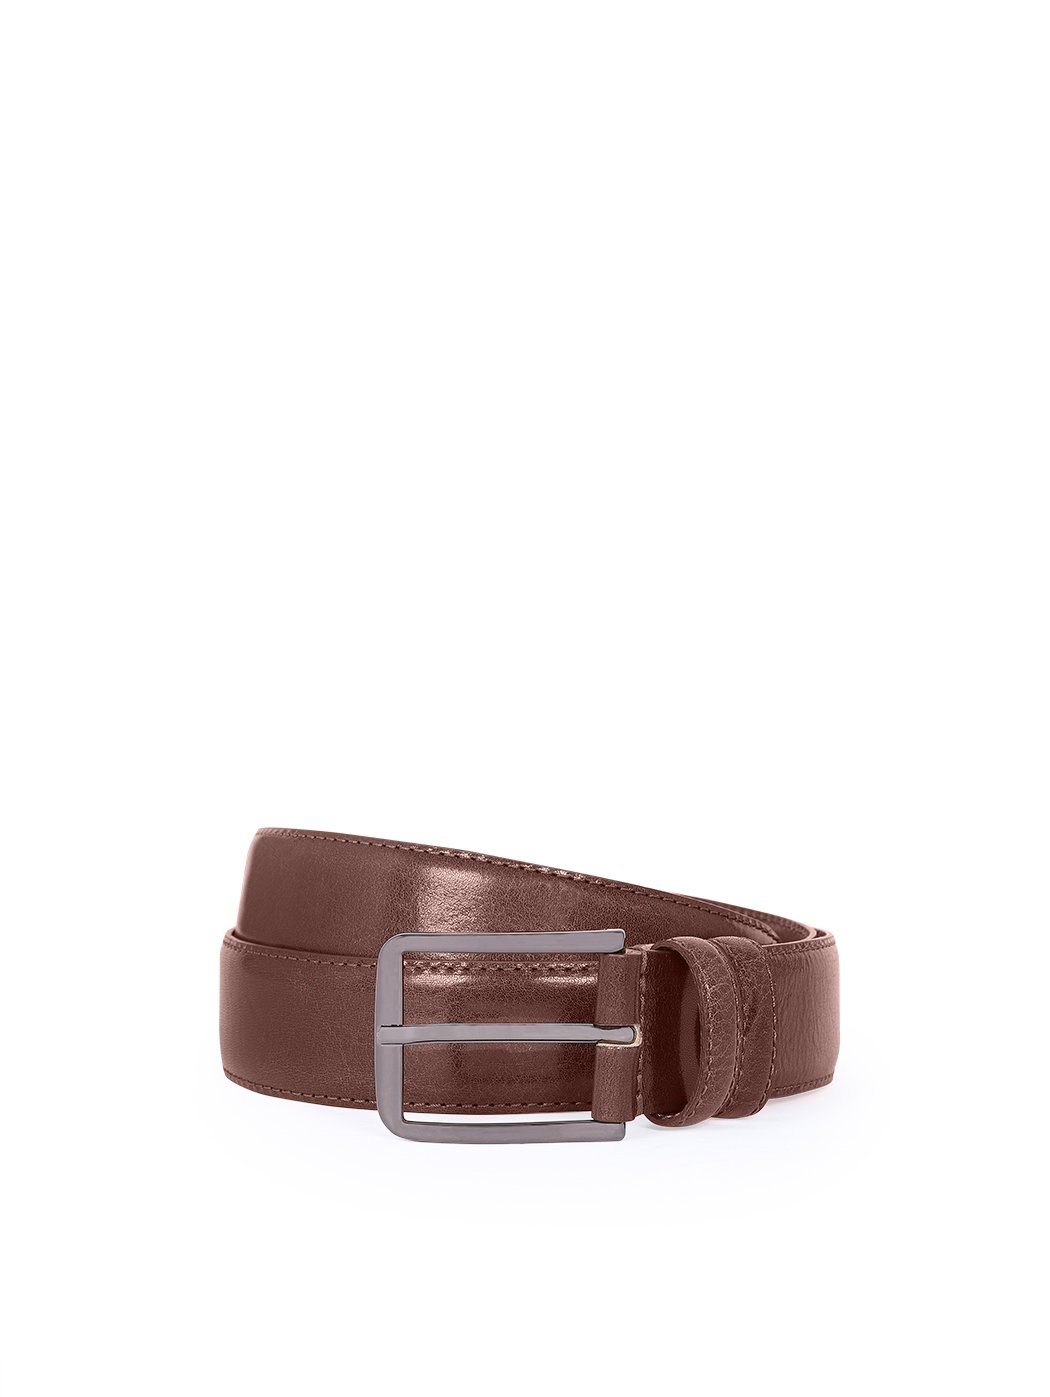 Classic Italian Belt For Man With Stitching Dark brown